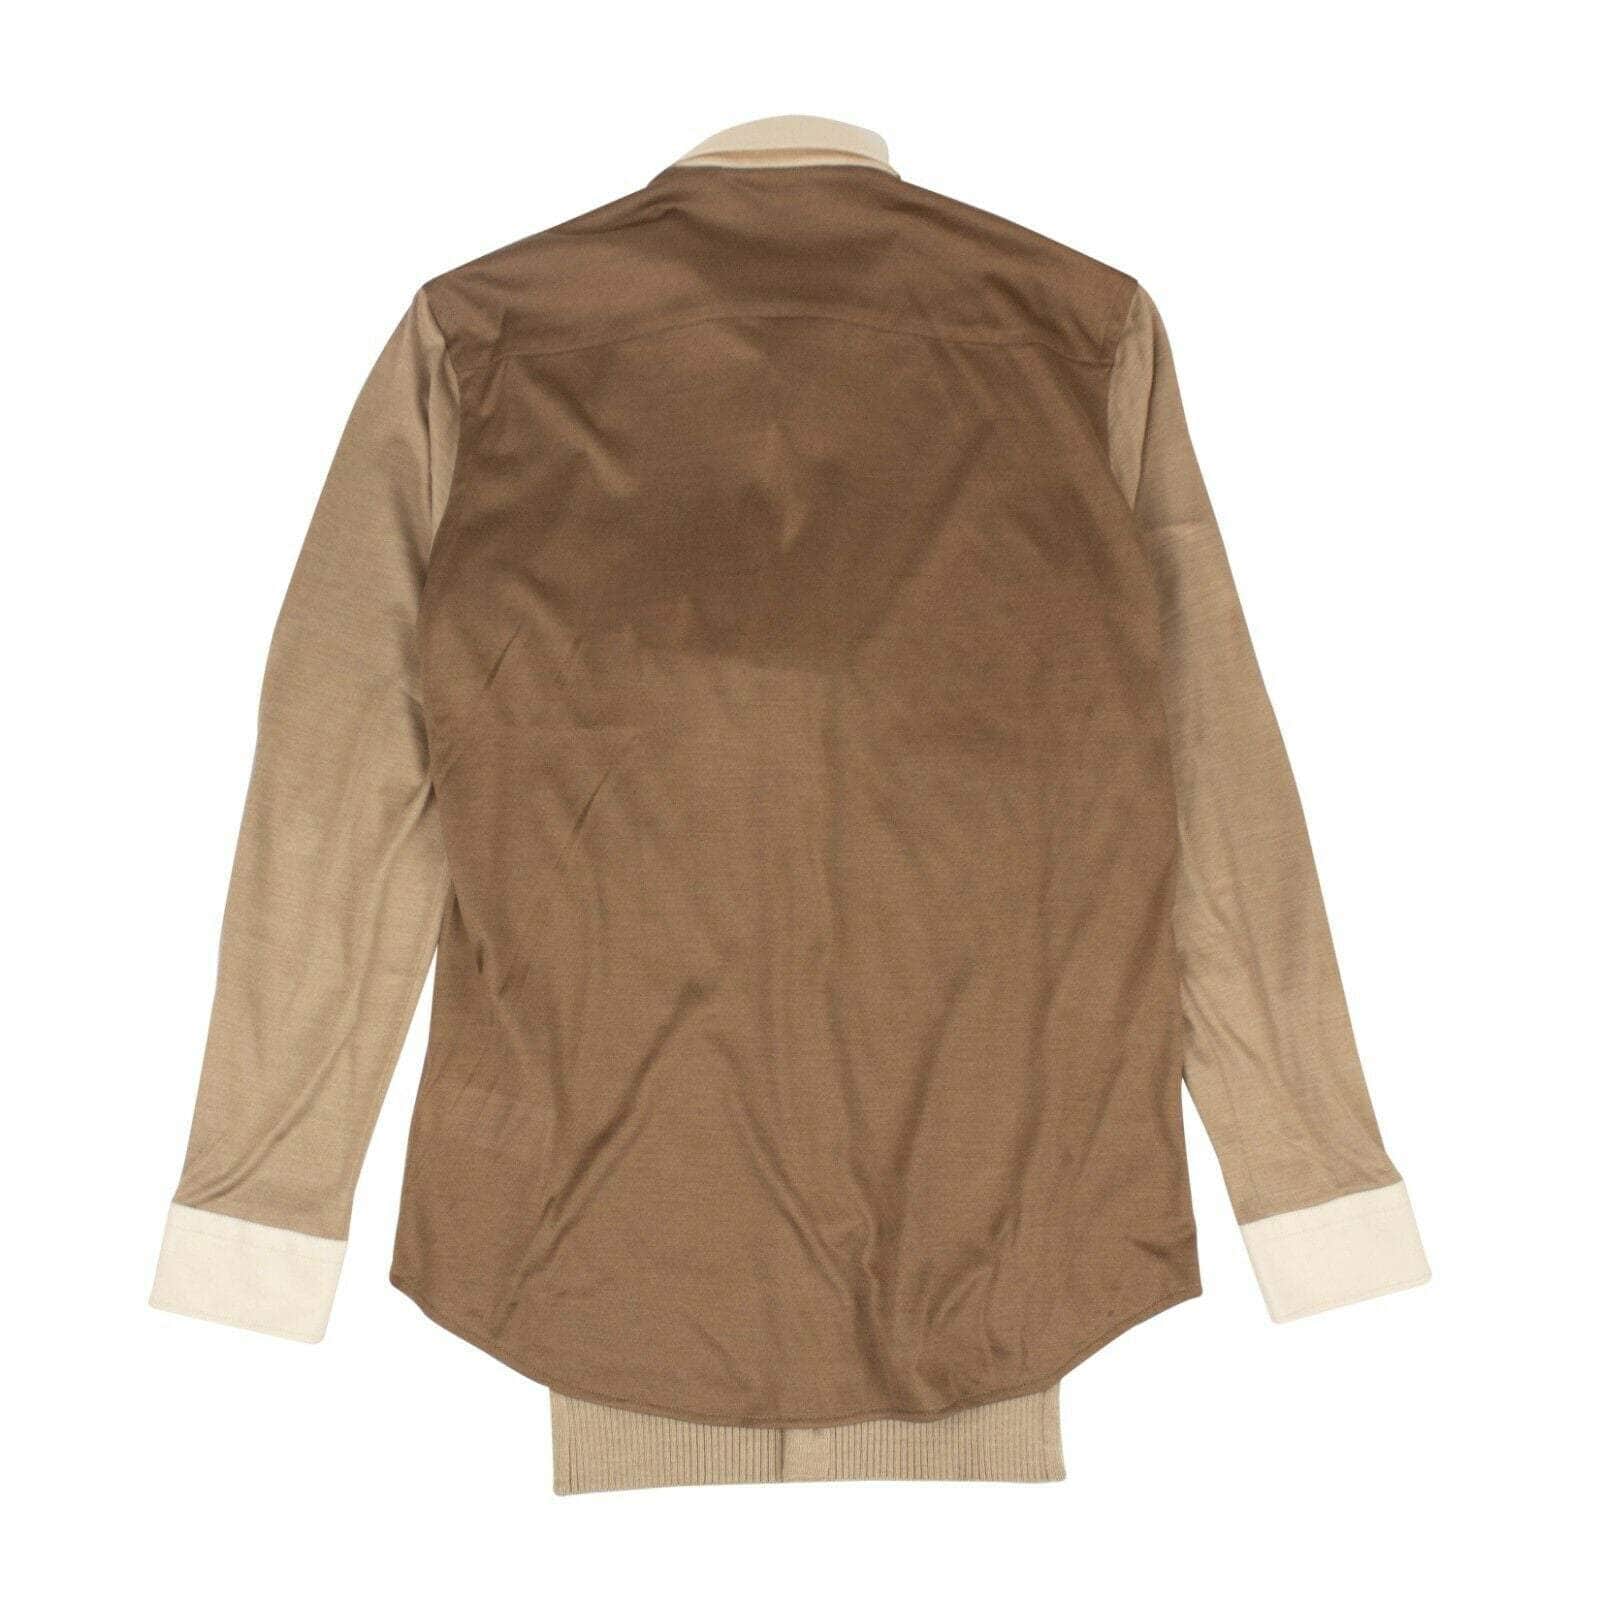 Burberry 1000-2000, burberry, channelenable-all, chicmi, couponcollection, gender-mens, main-clothing, newarrival2, size-37-eu, size-38-eu, size-39-eu, size-40-eu Burberry Men's Tan And Brown Multicolor Collar Shirt